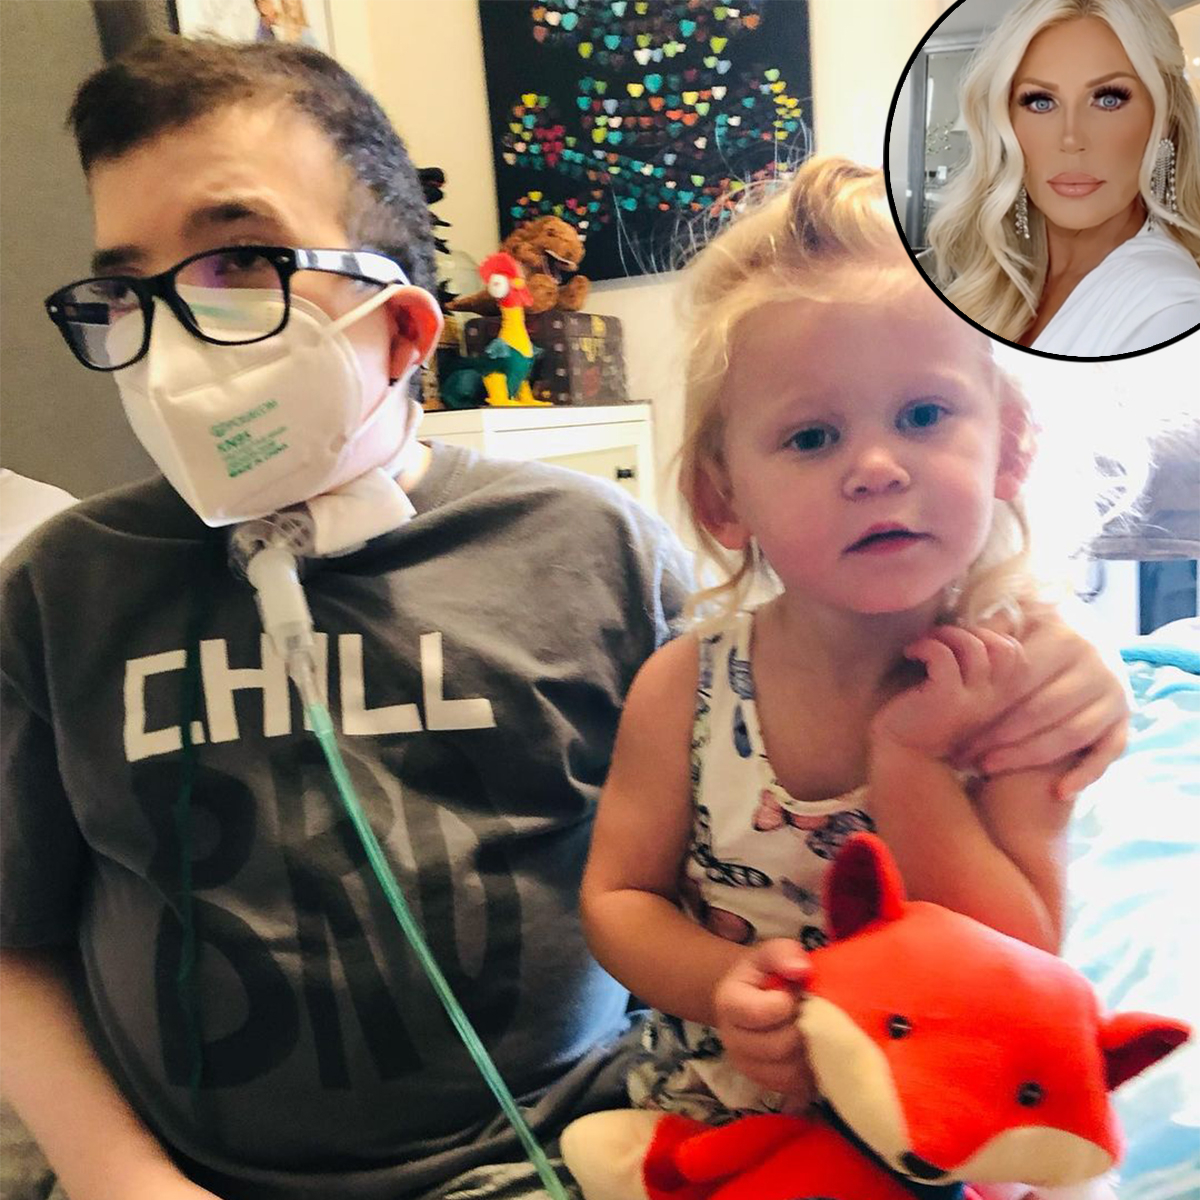 Gretchen Rossi Shares Family Memories With Slade Smiley’s Son Grayson Before His Death – E! Online